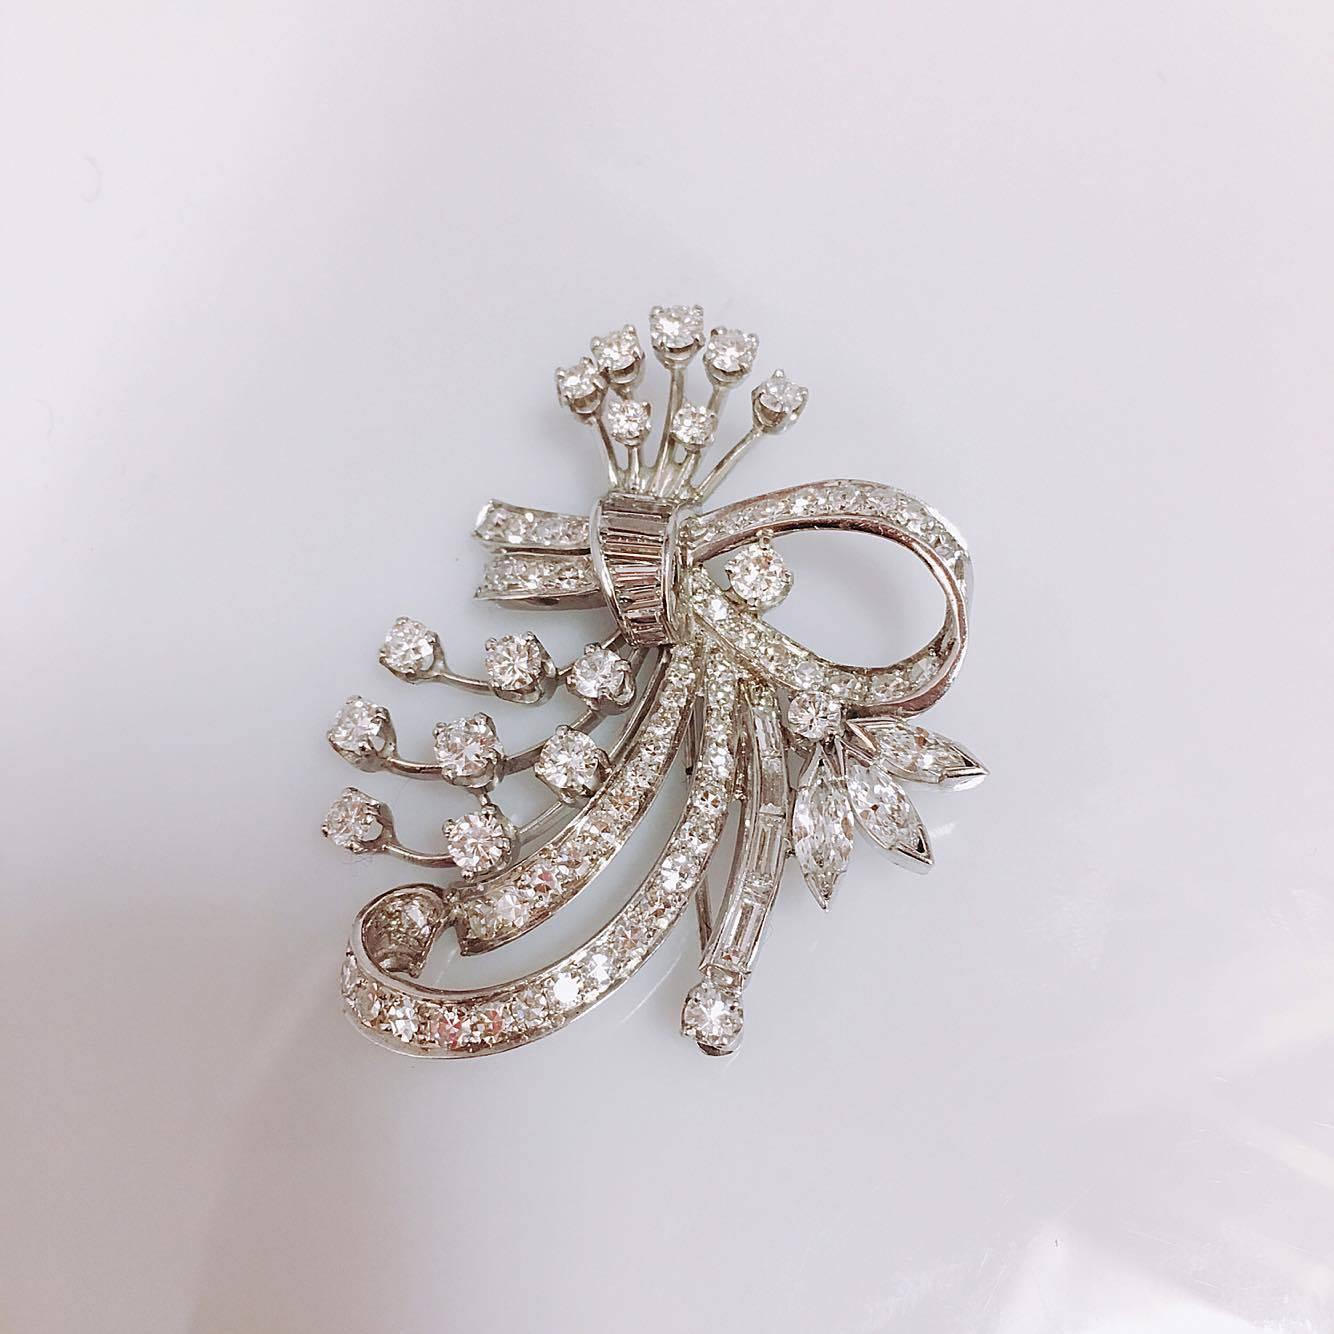 E Color VVS1 Clarity Mixed Fancy shaped diamonds were put together to create this masterpiece Brooch! Don't miss out on this listing the price is great for this look!  

Approximately 5.30cts T.W. 
All Emilio! pieces come with a professional